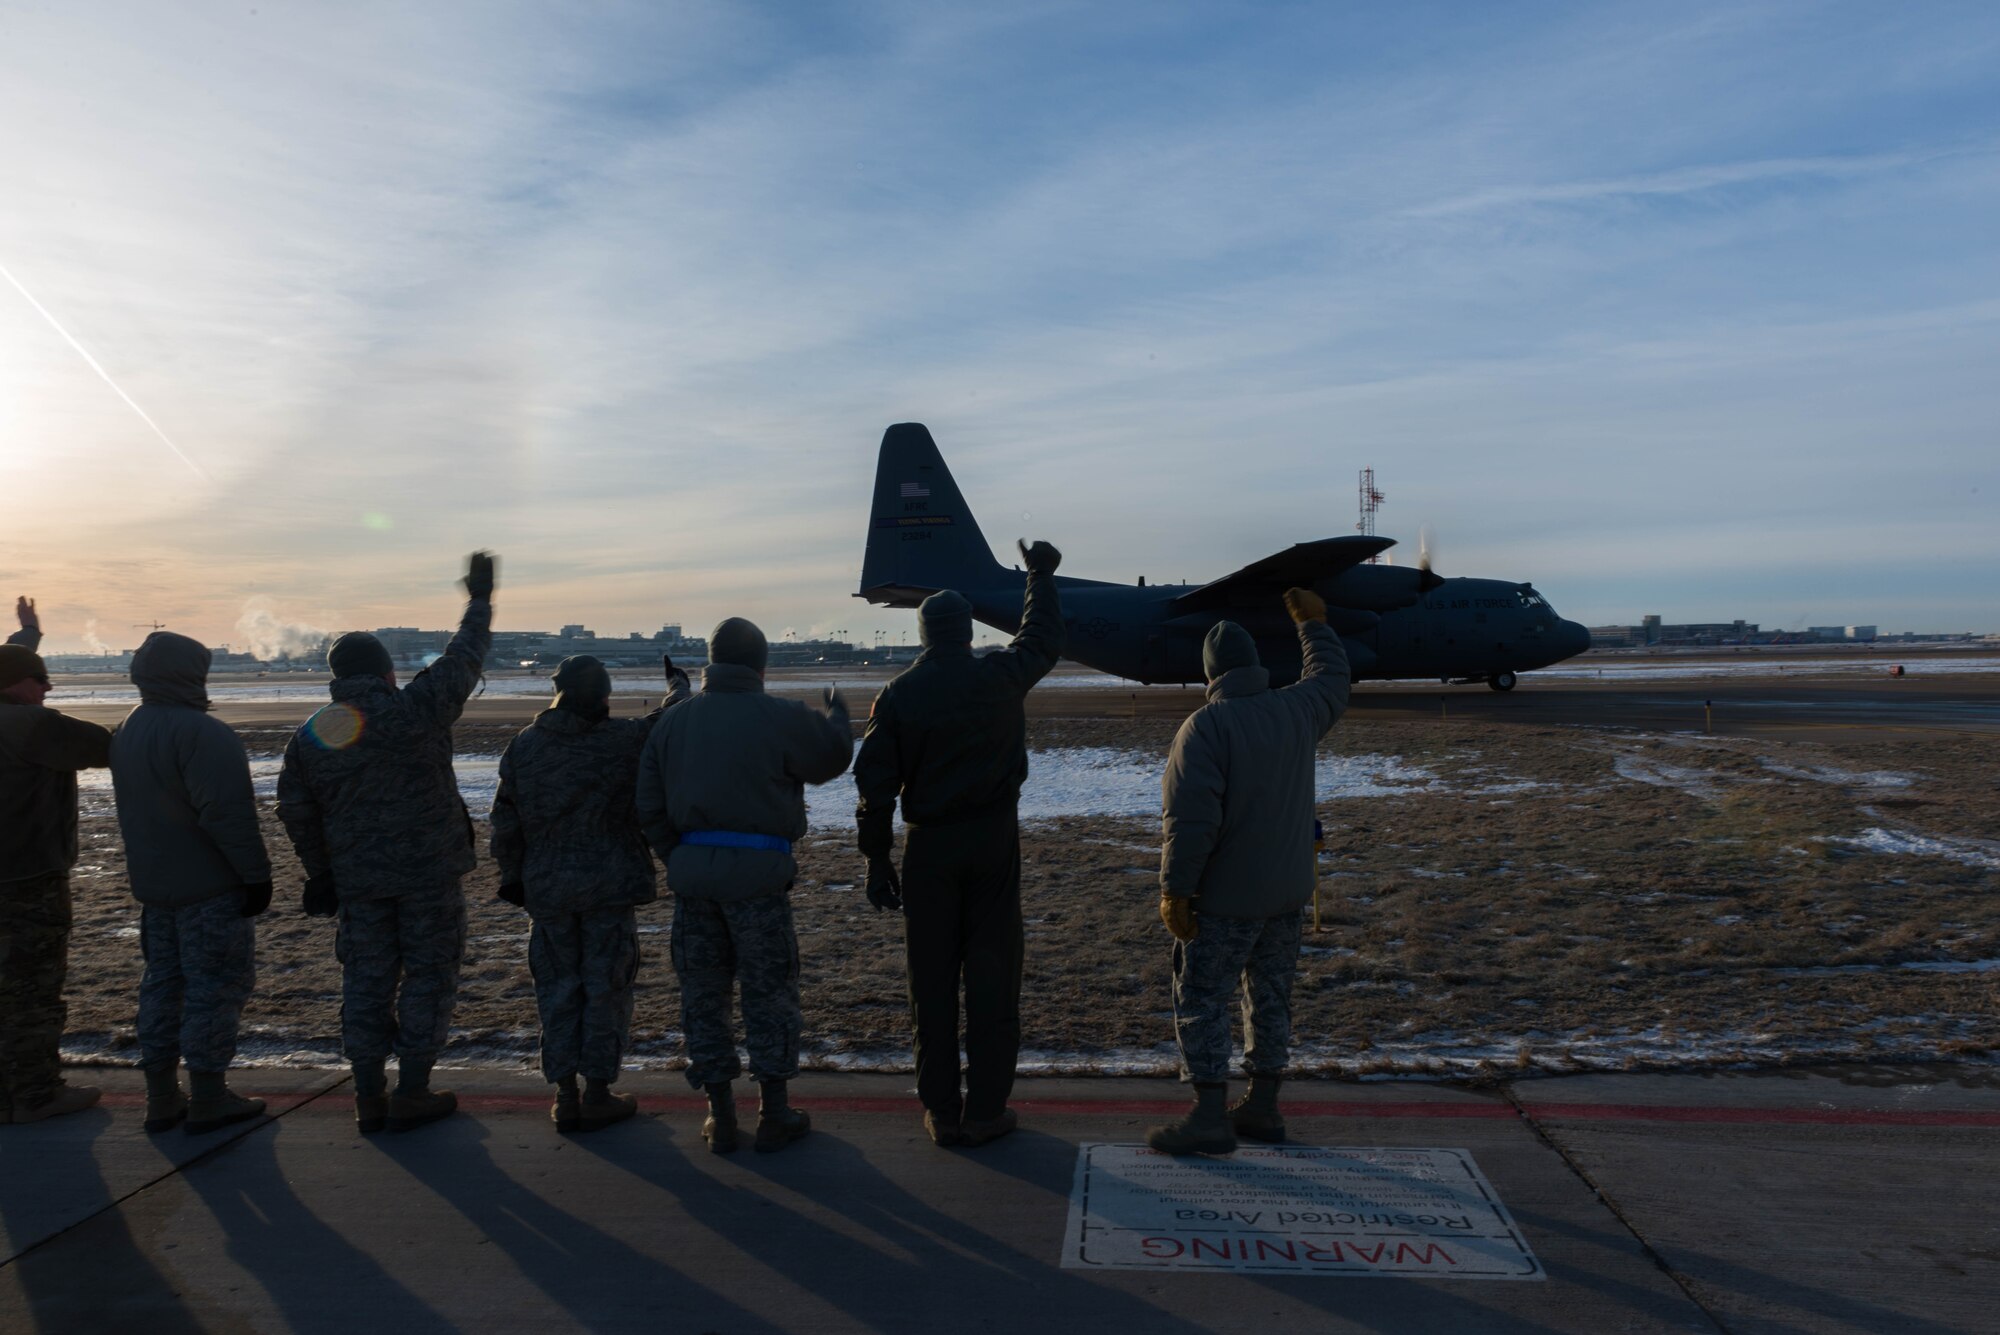 934th Airlift Wing senior leadership waves to a plane as it takes off in support of the deployment to Southwest Asia on January 8. (U.S. Air Force photo by Tech. Sgt. Trevor Saylor)